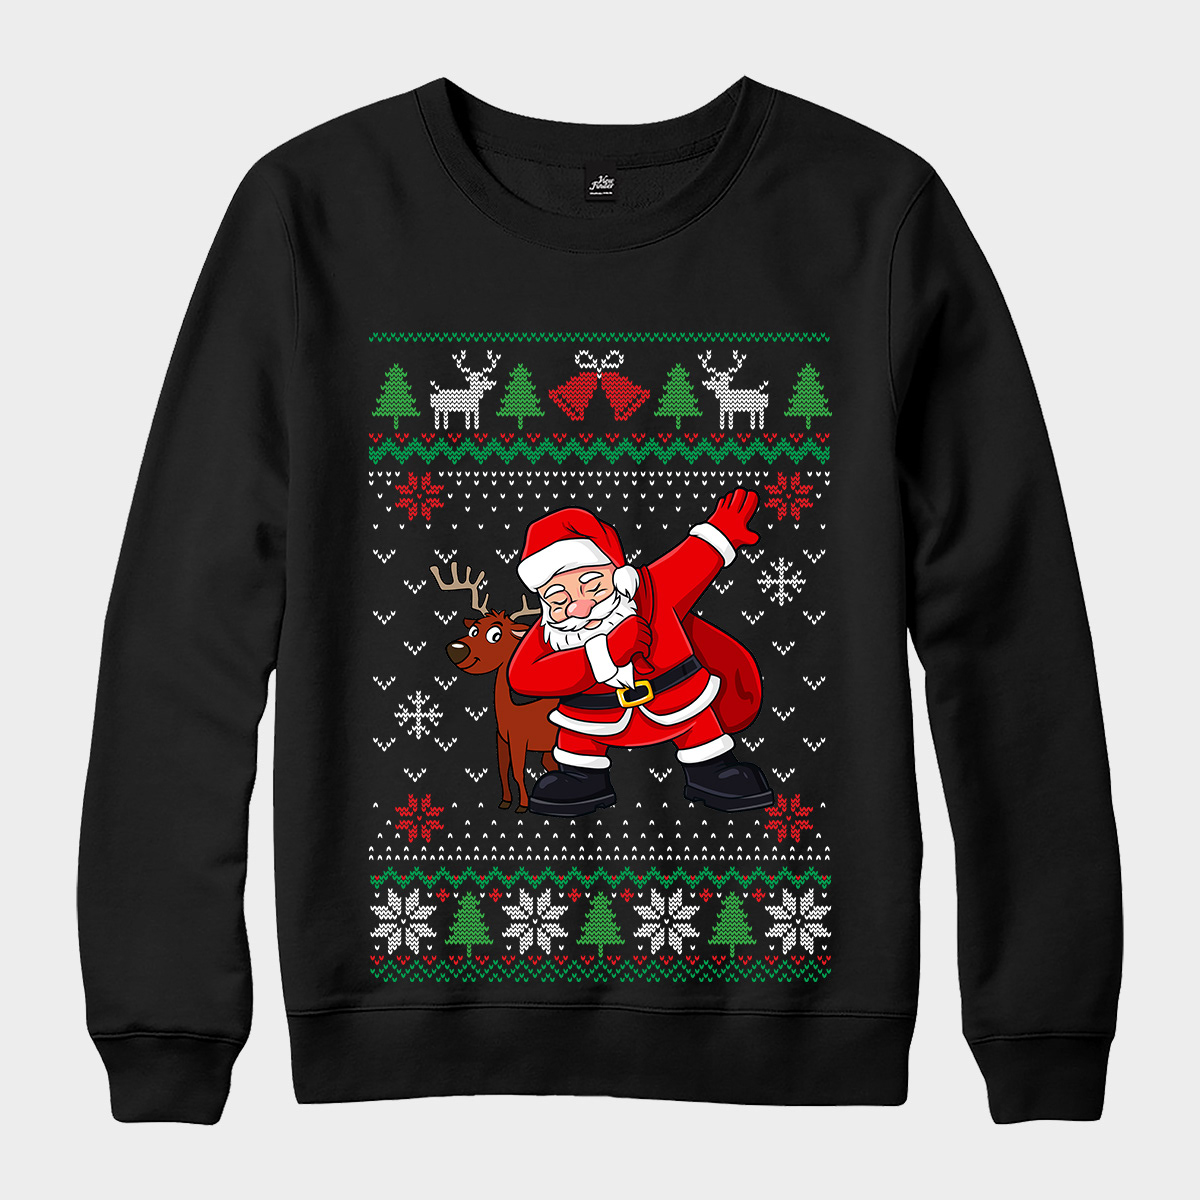 Ugly Christmas Sweater Design. 